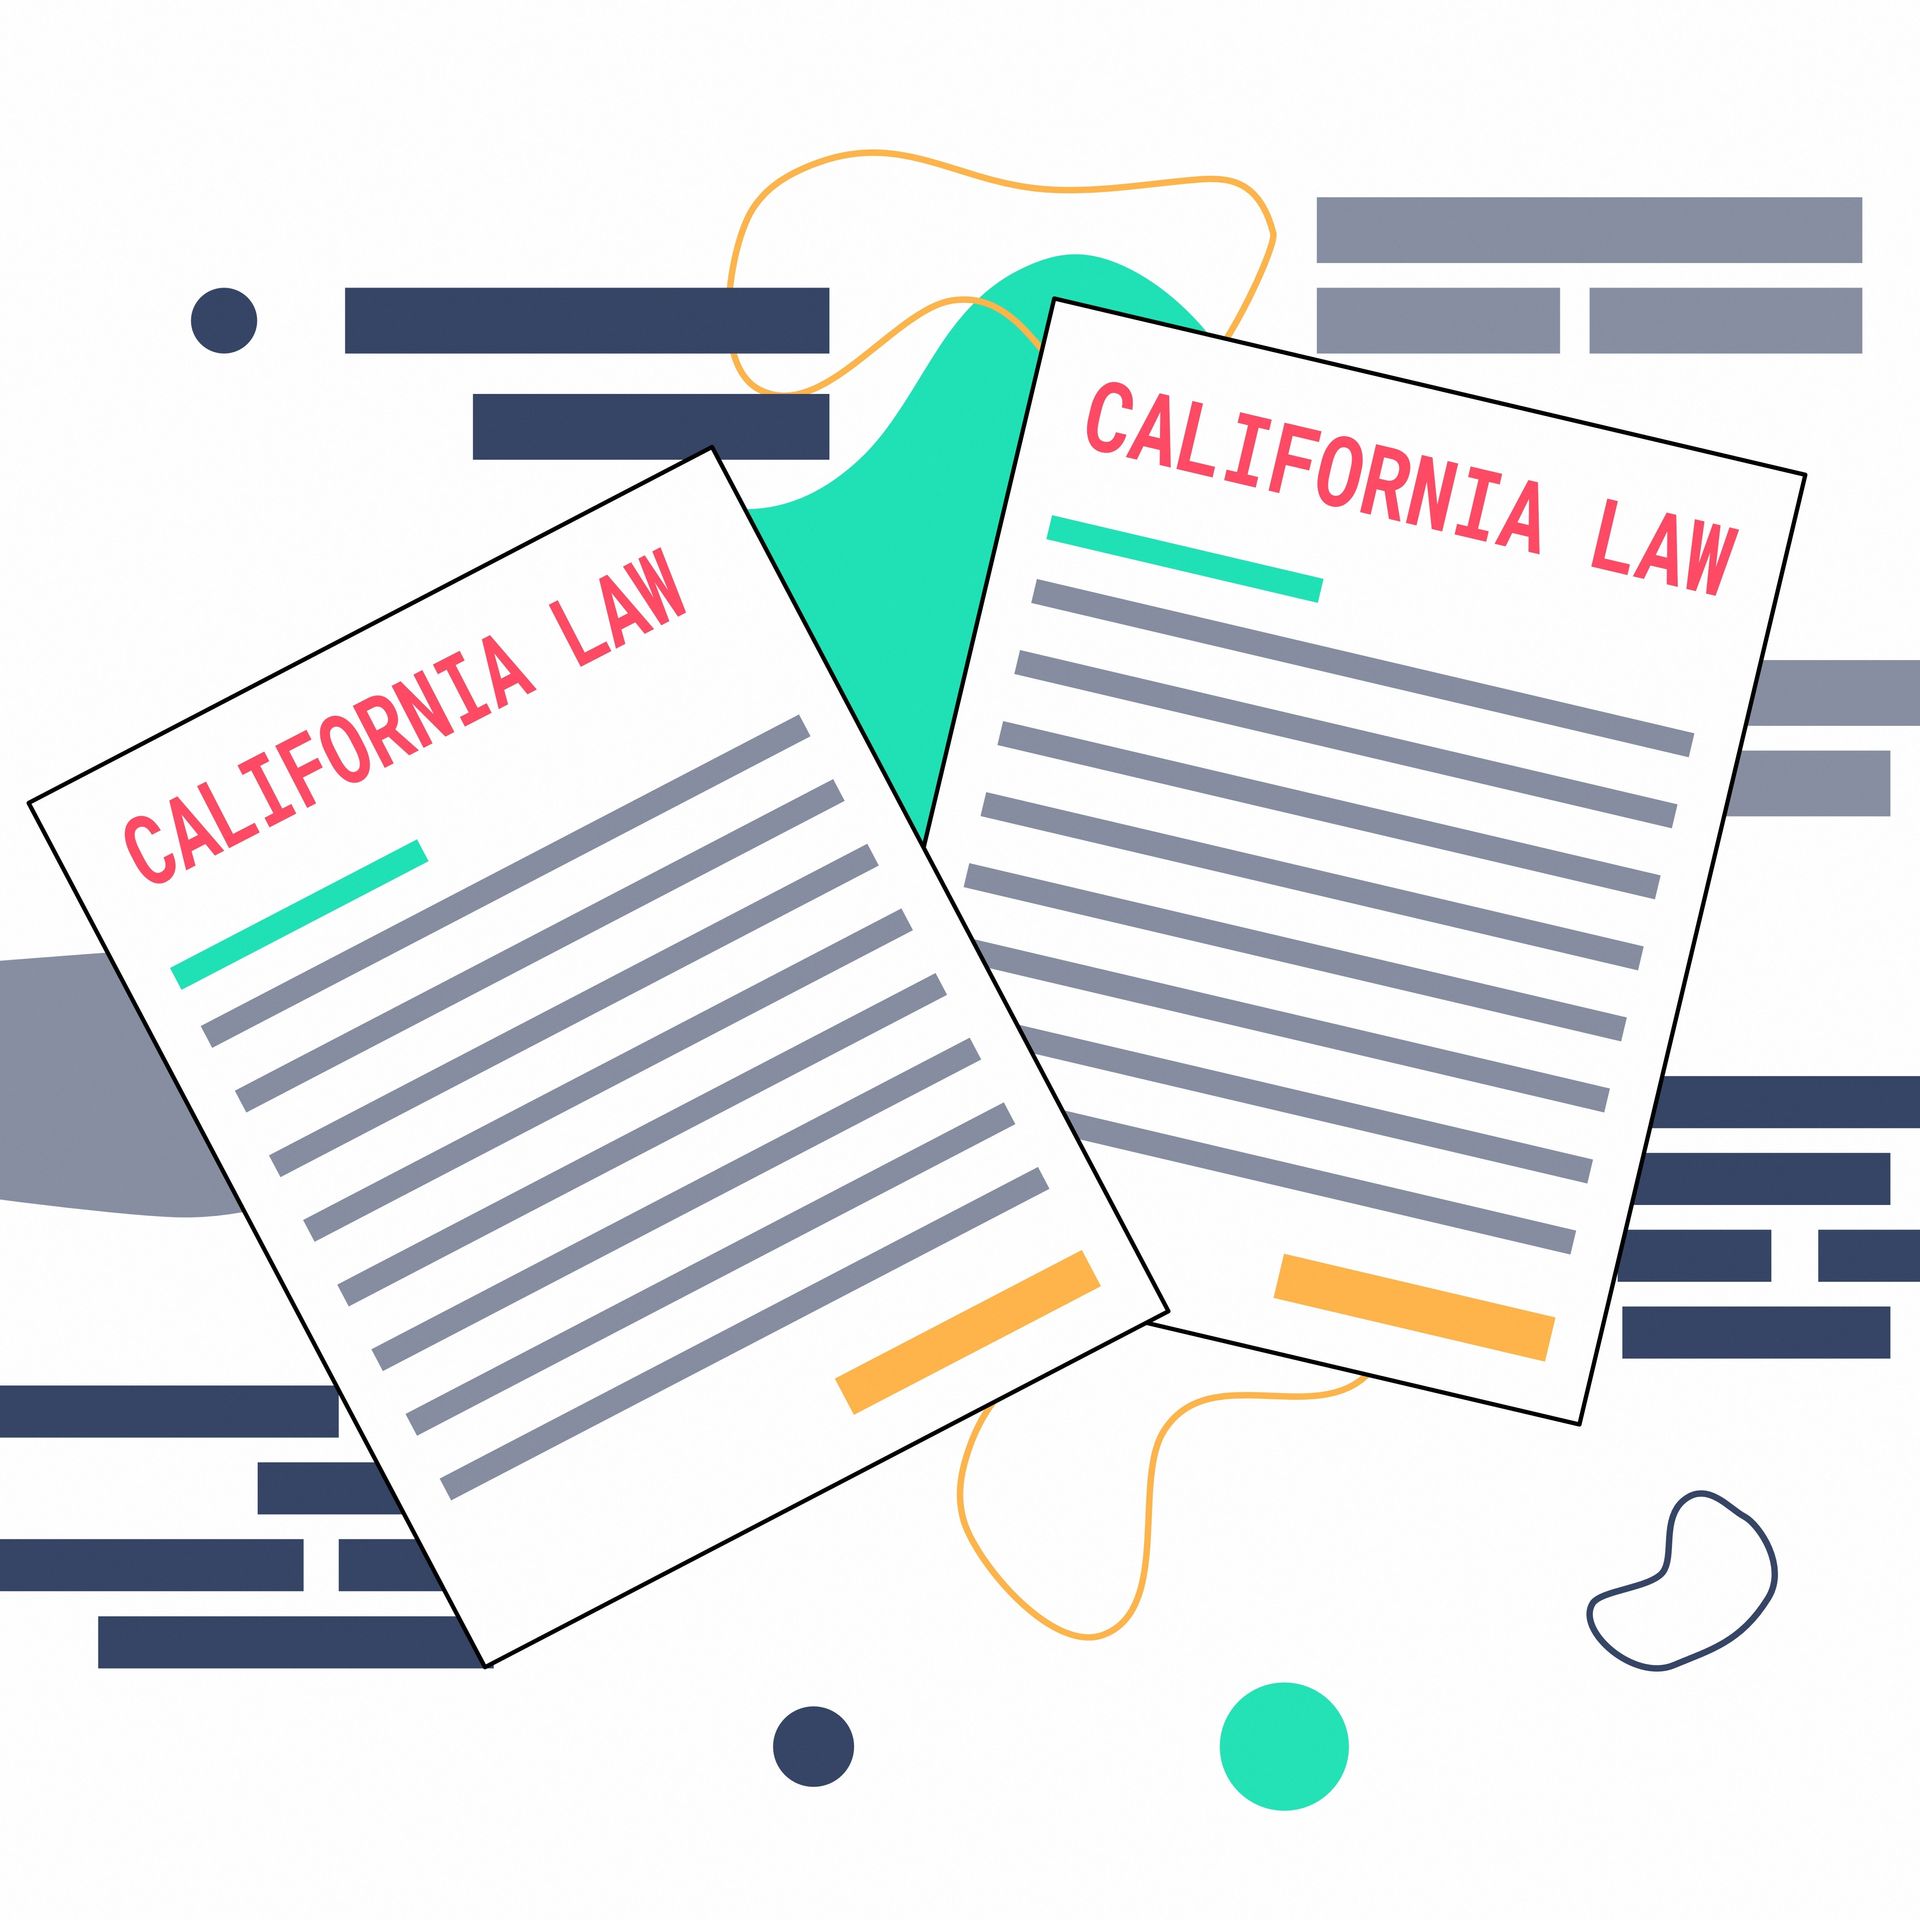 California background check laws